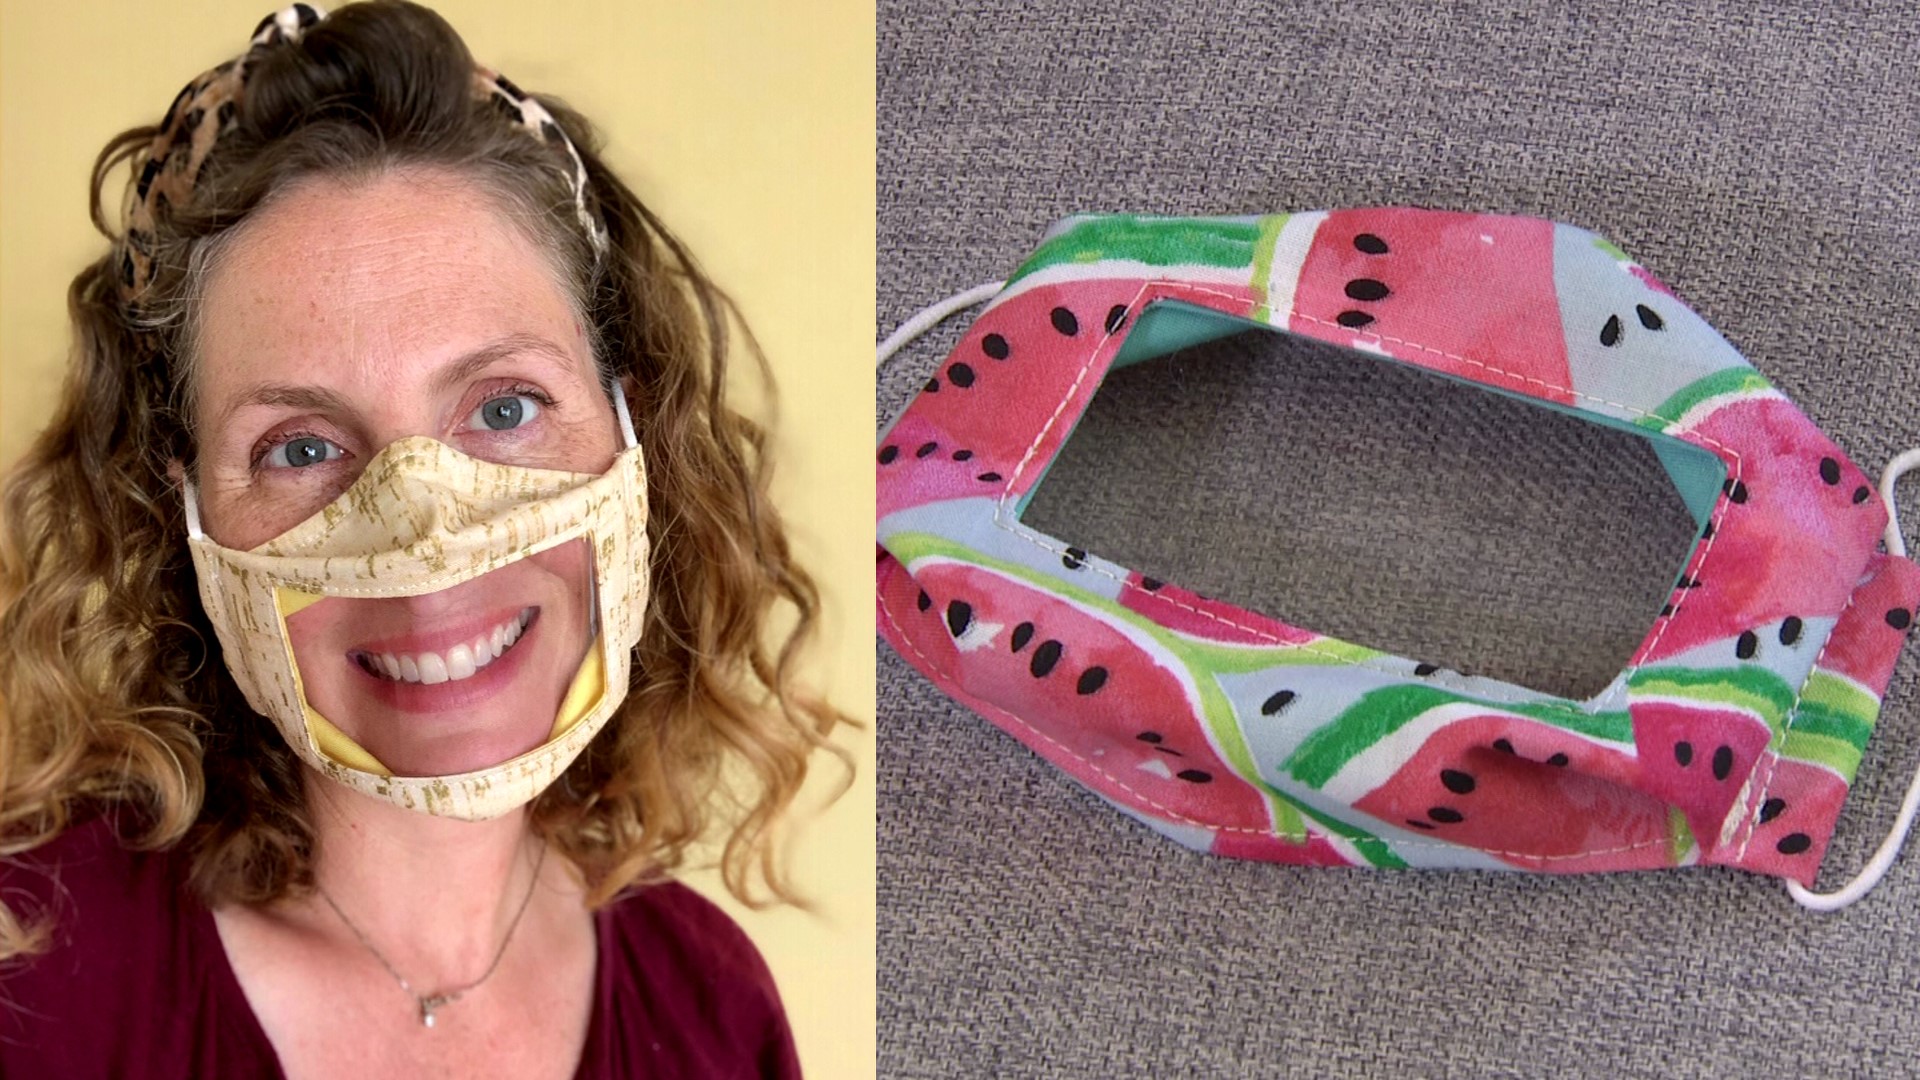 She's shipping her hand made masks all over the country. #k5evening